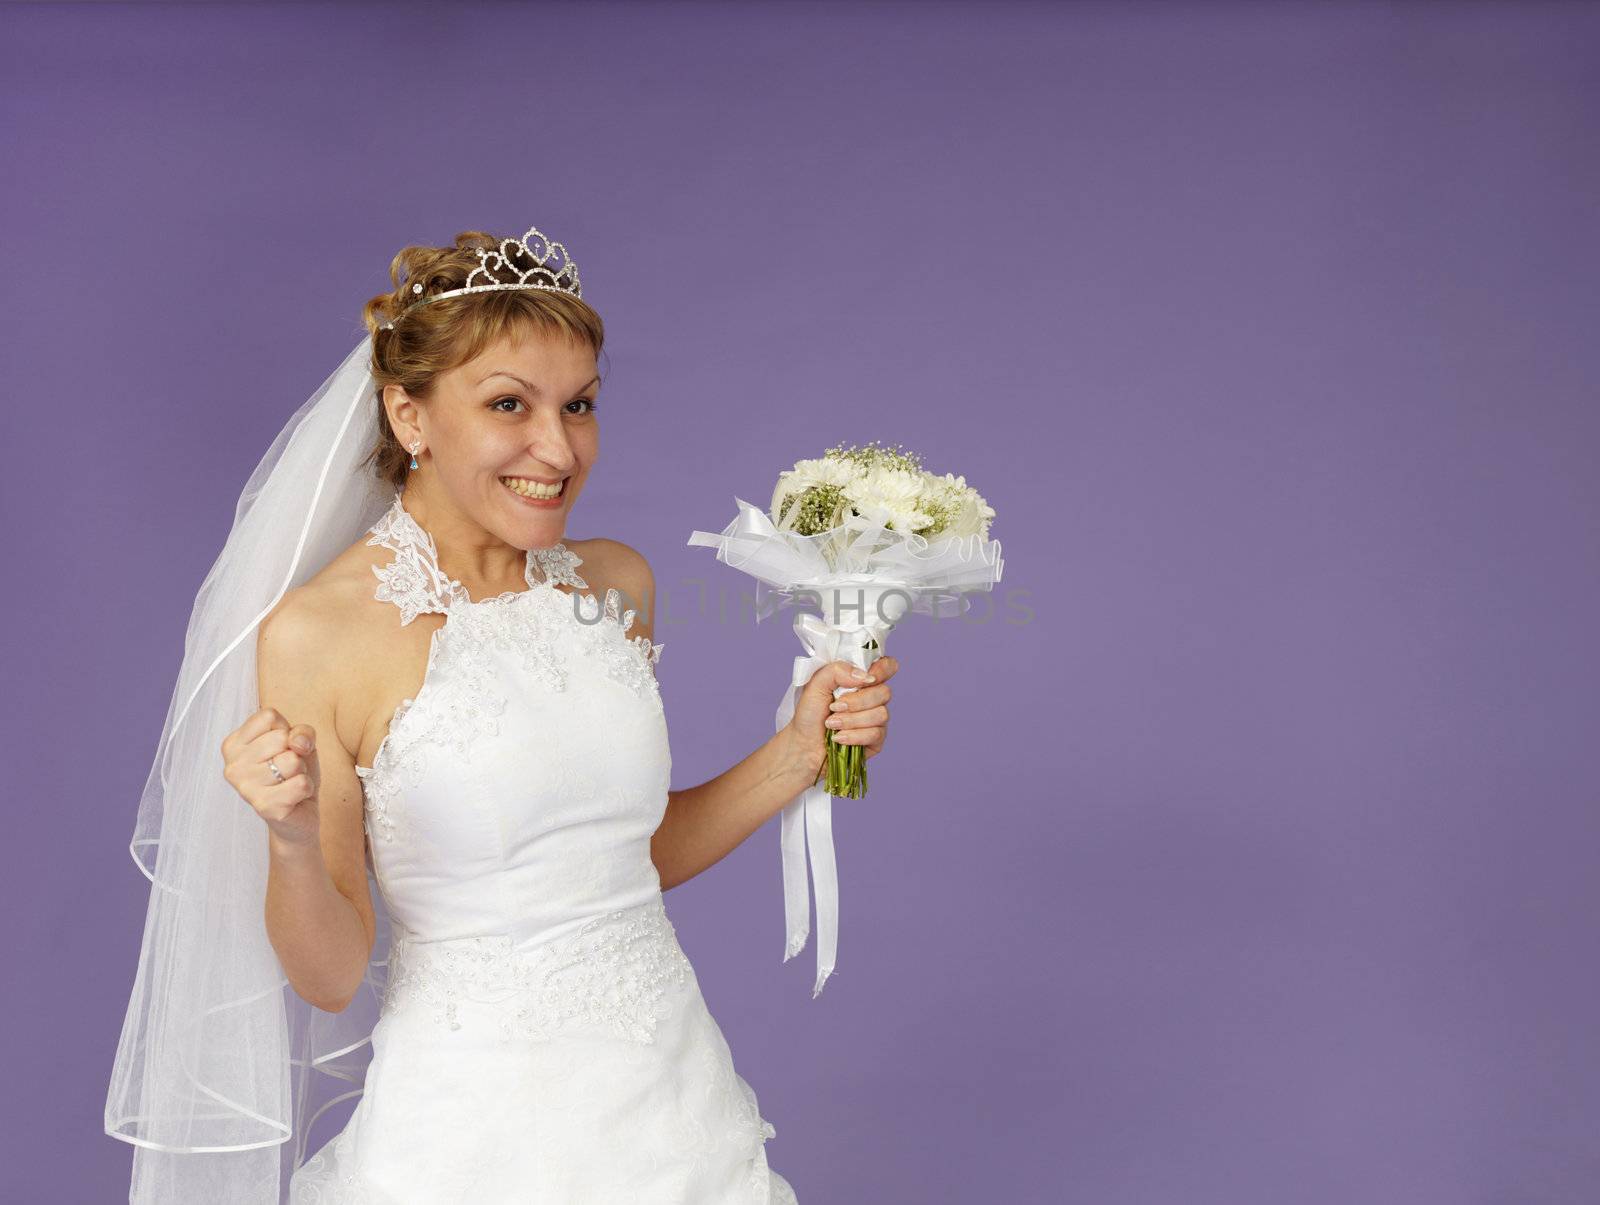 A very happy bride on a purple background